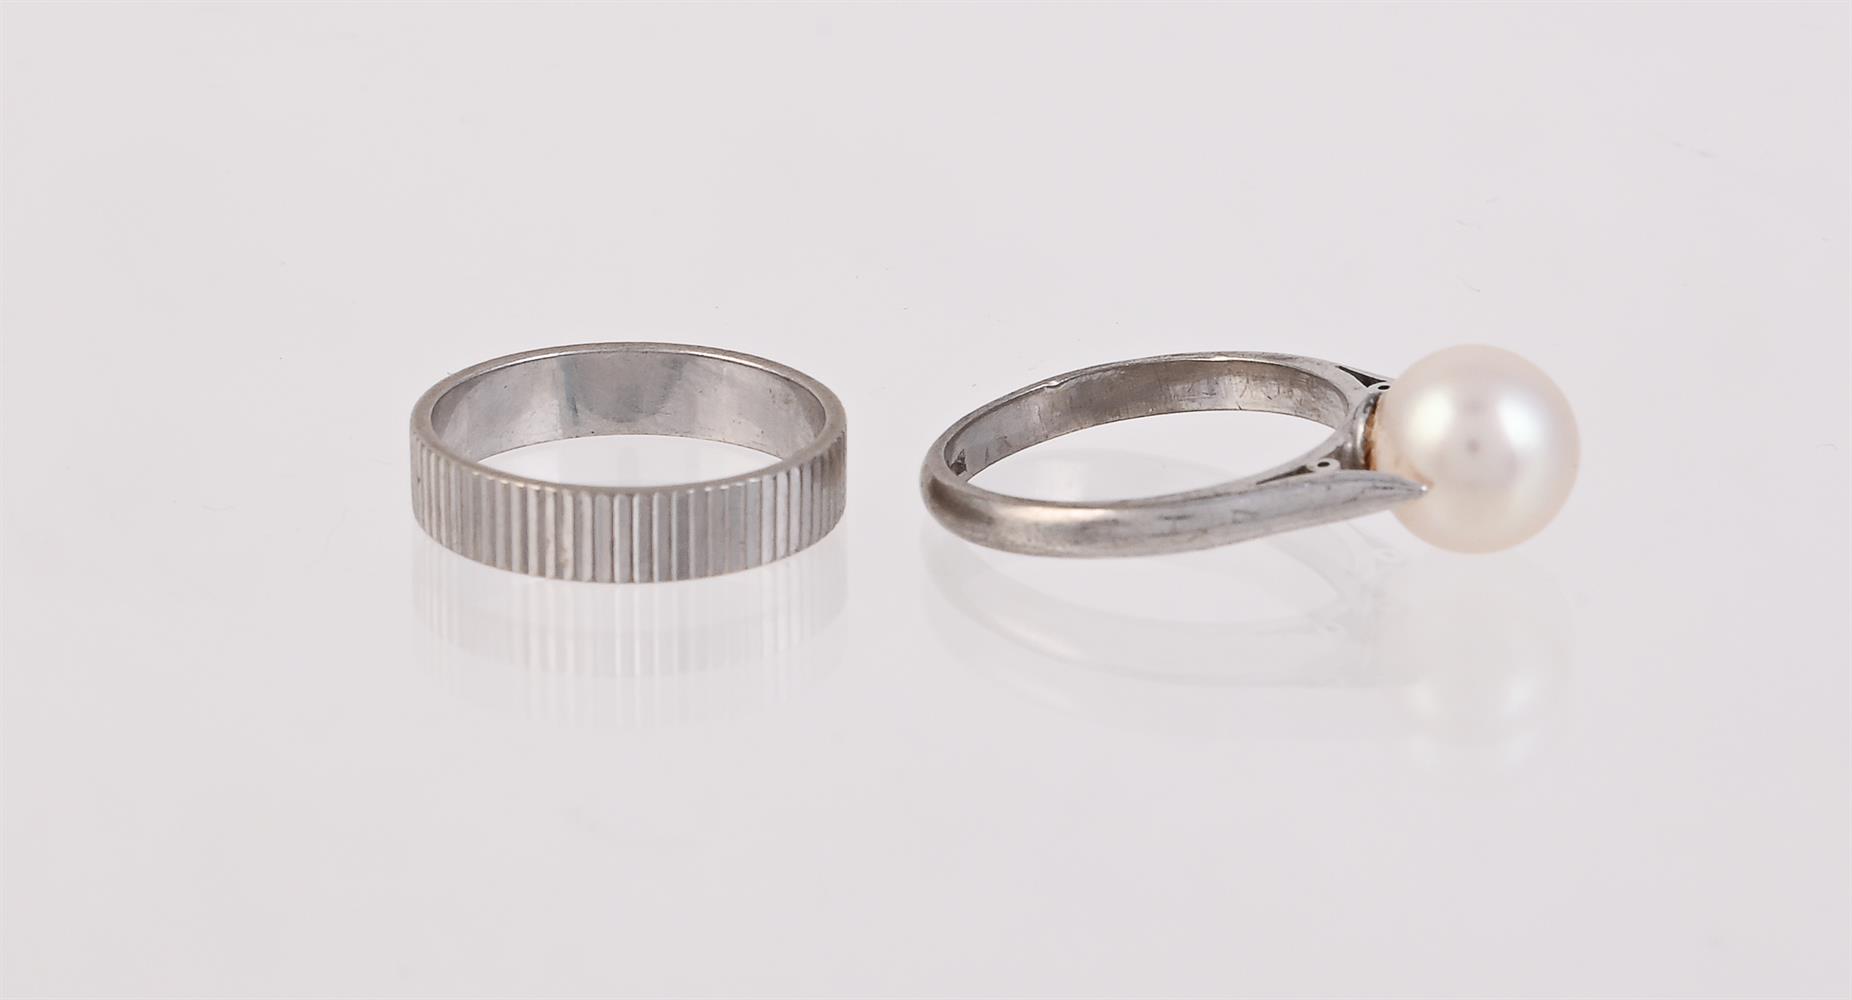 A CULTURED PEARL RING AND A STRIATED BAND RING - Image 2 of 2